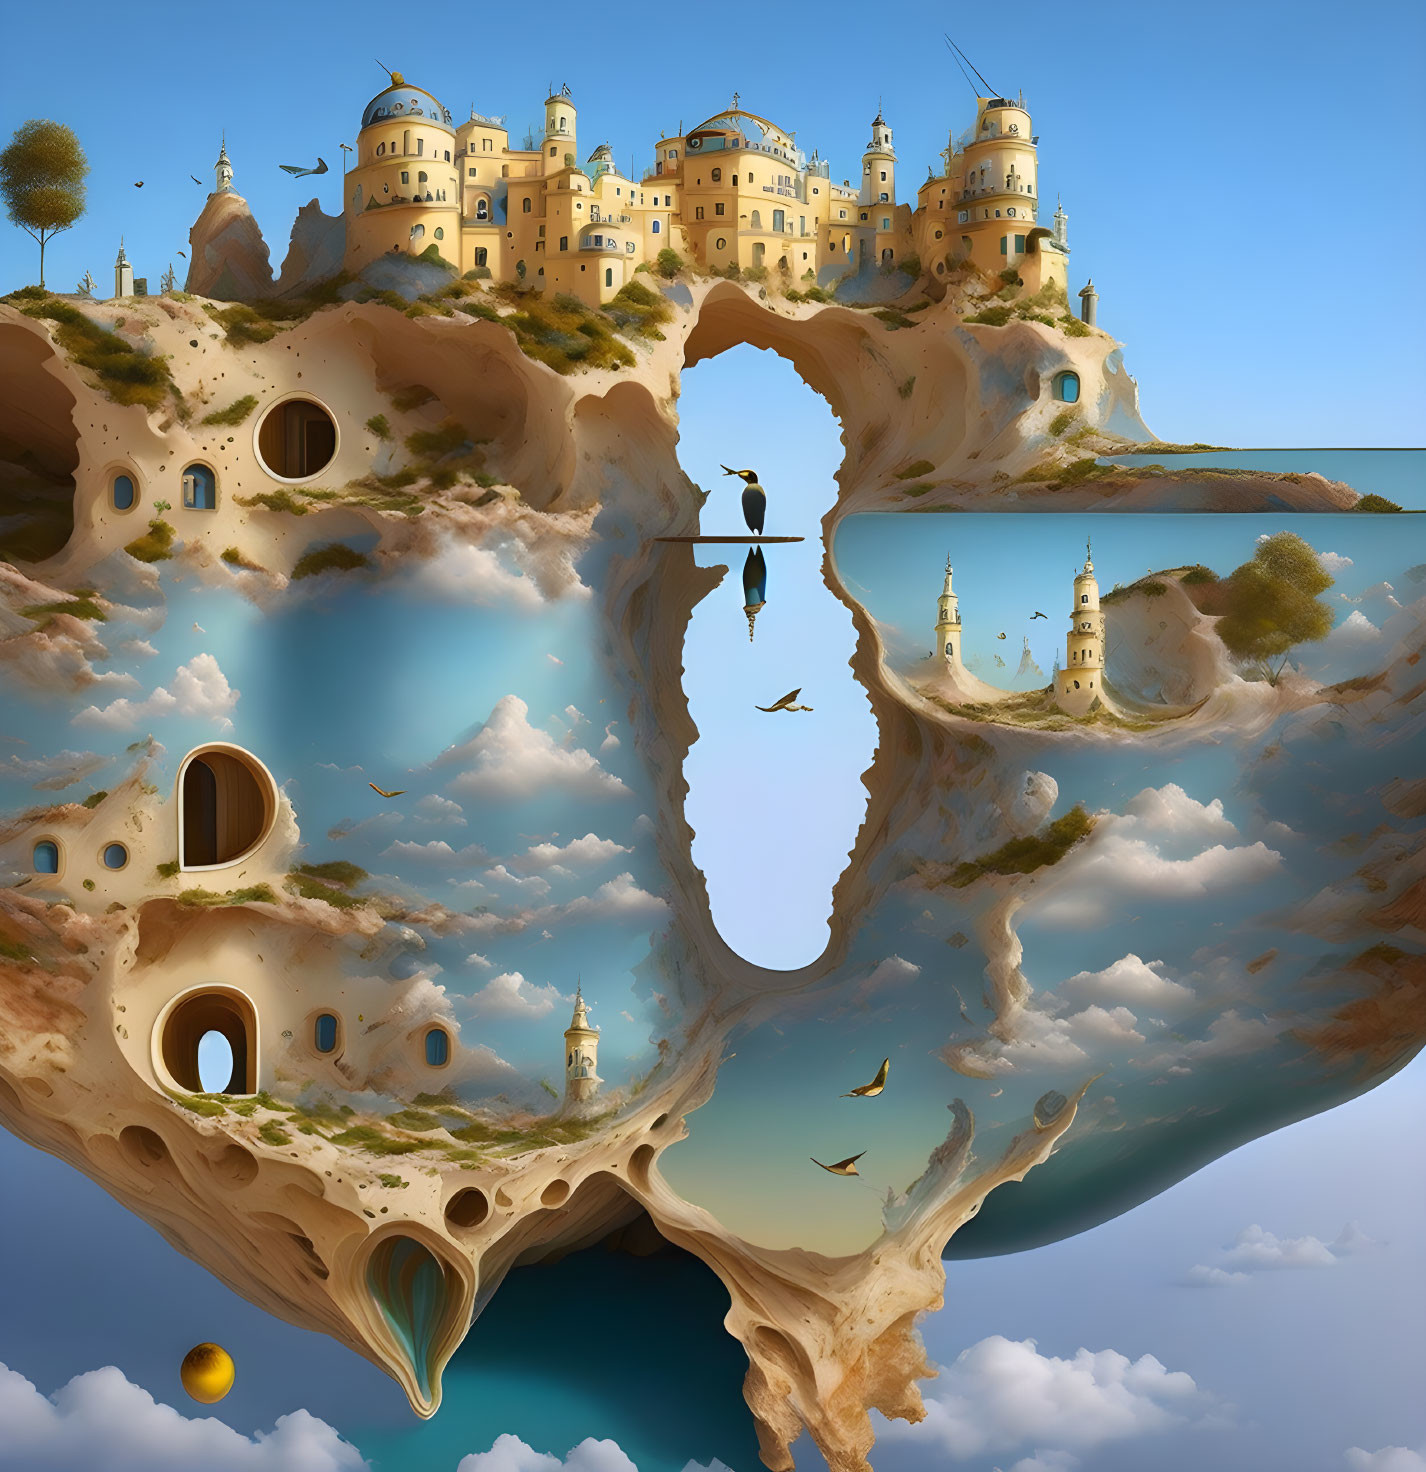 Mirrored castle on surreal floating island with coastal caves and person standing above water under blue sky.